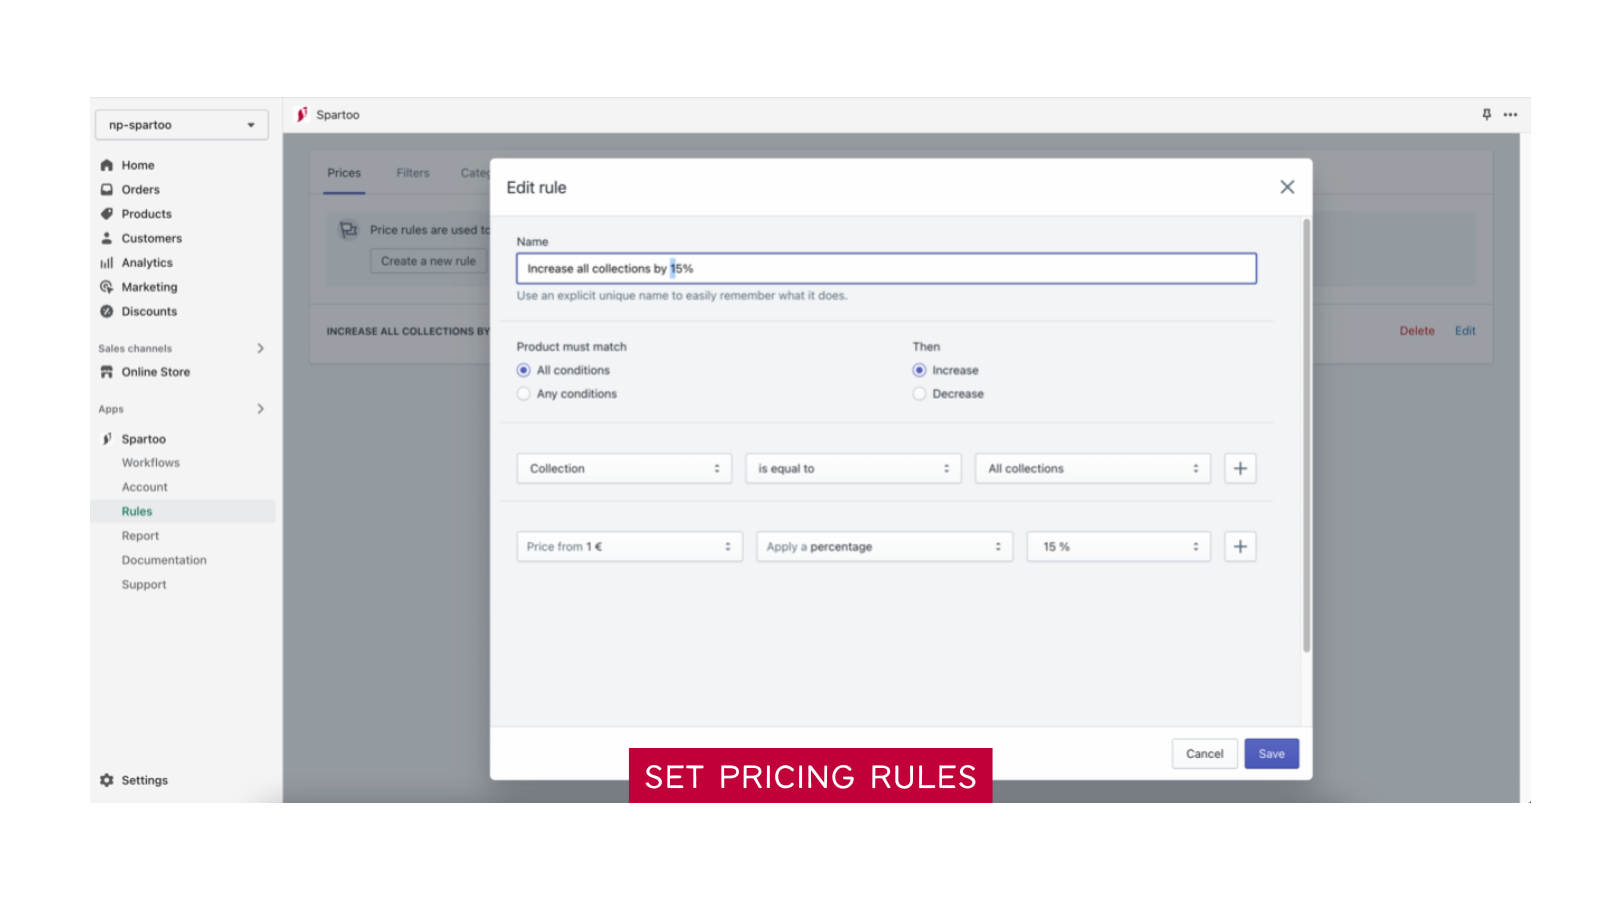 Set Pricing Rules - Spartoo Fashion Marketplace